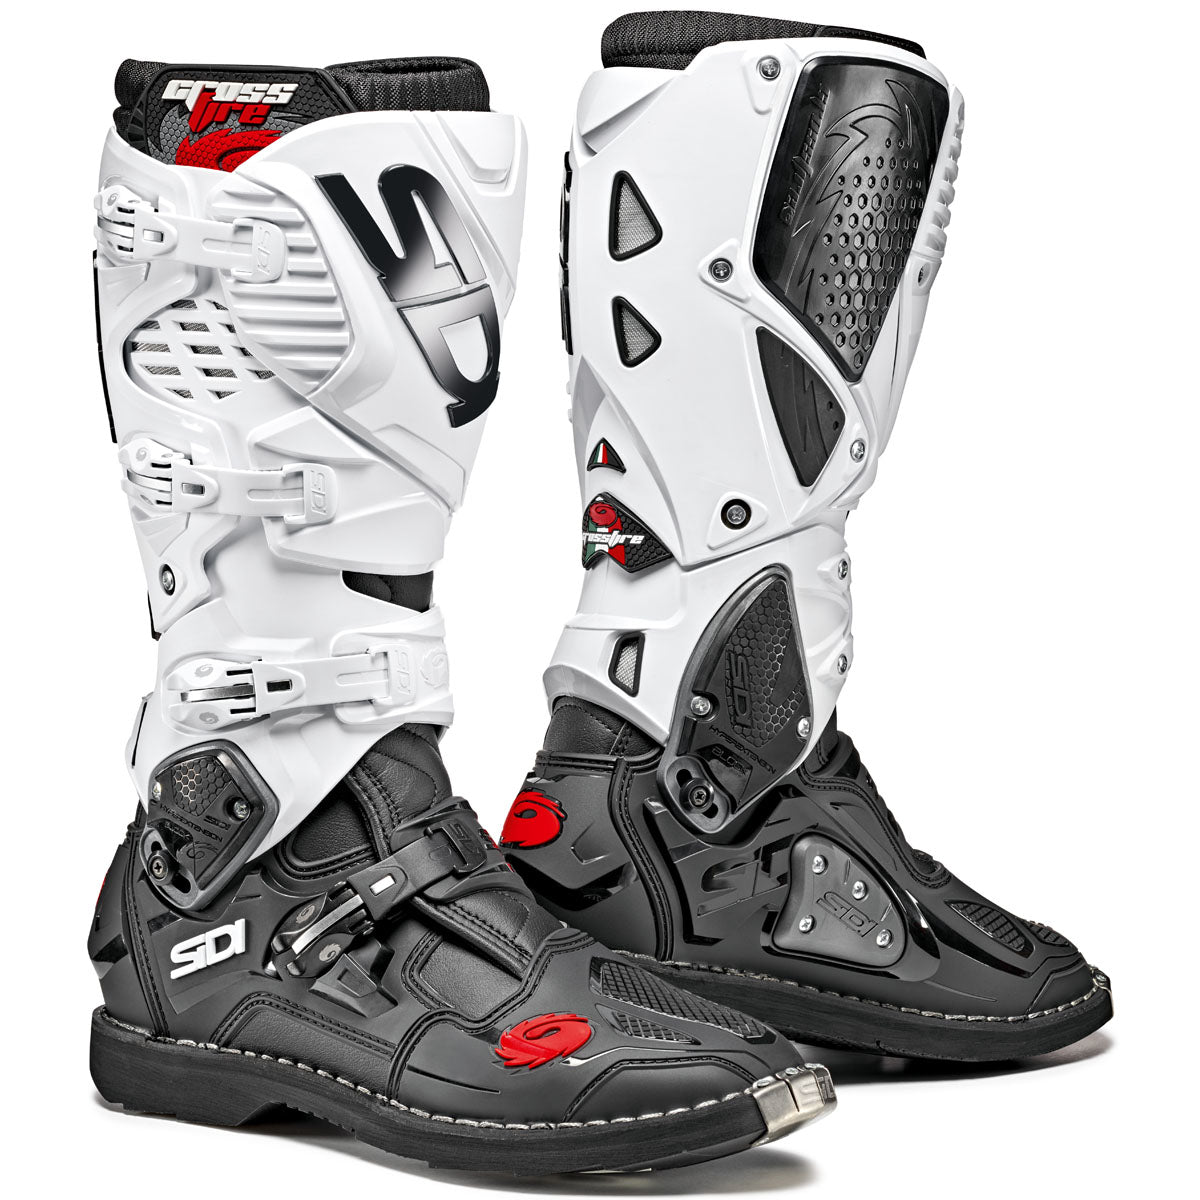 Sidi Crossfire 3 TA Off-Road Motorcycle Boots - Black/White